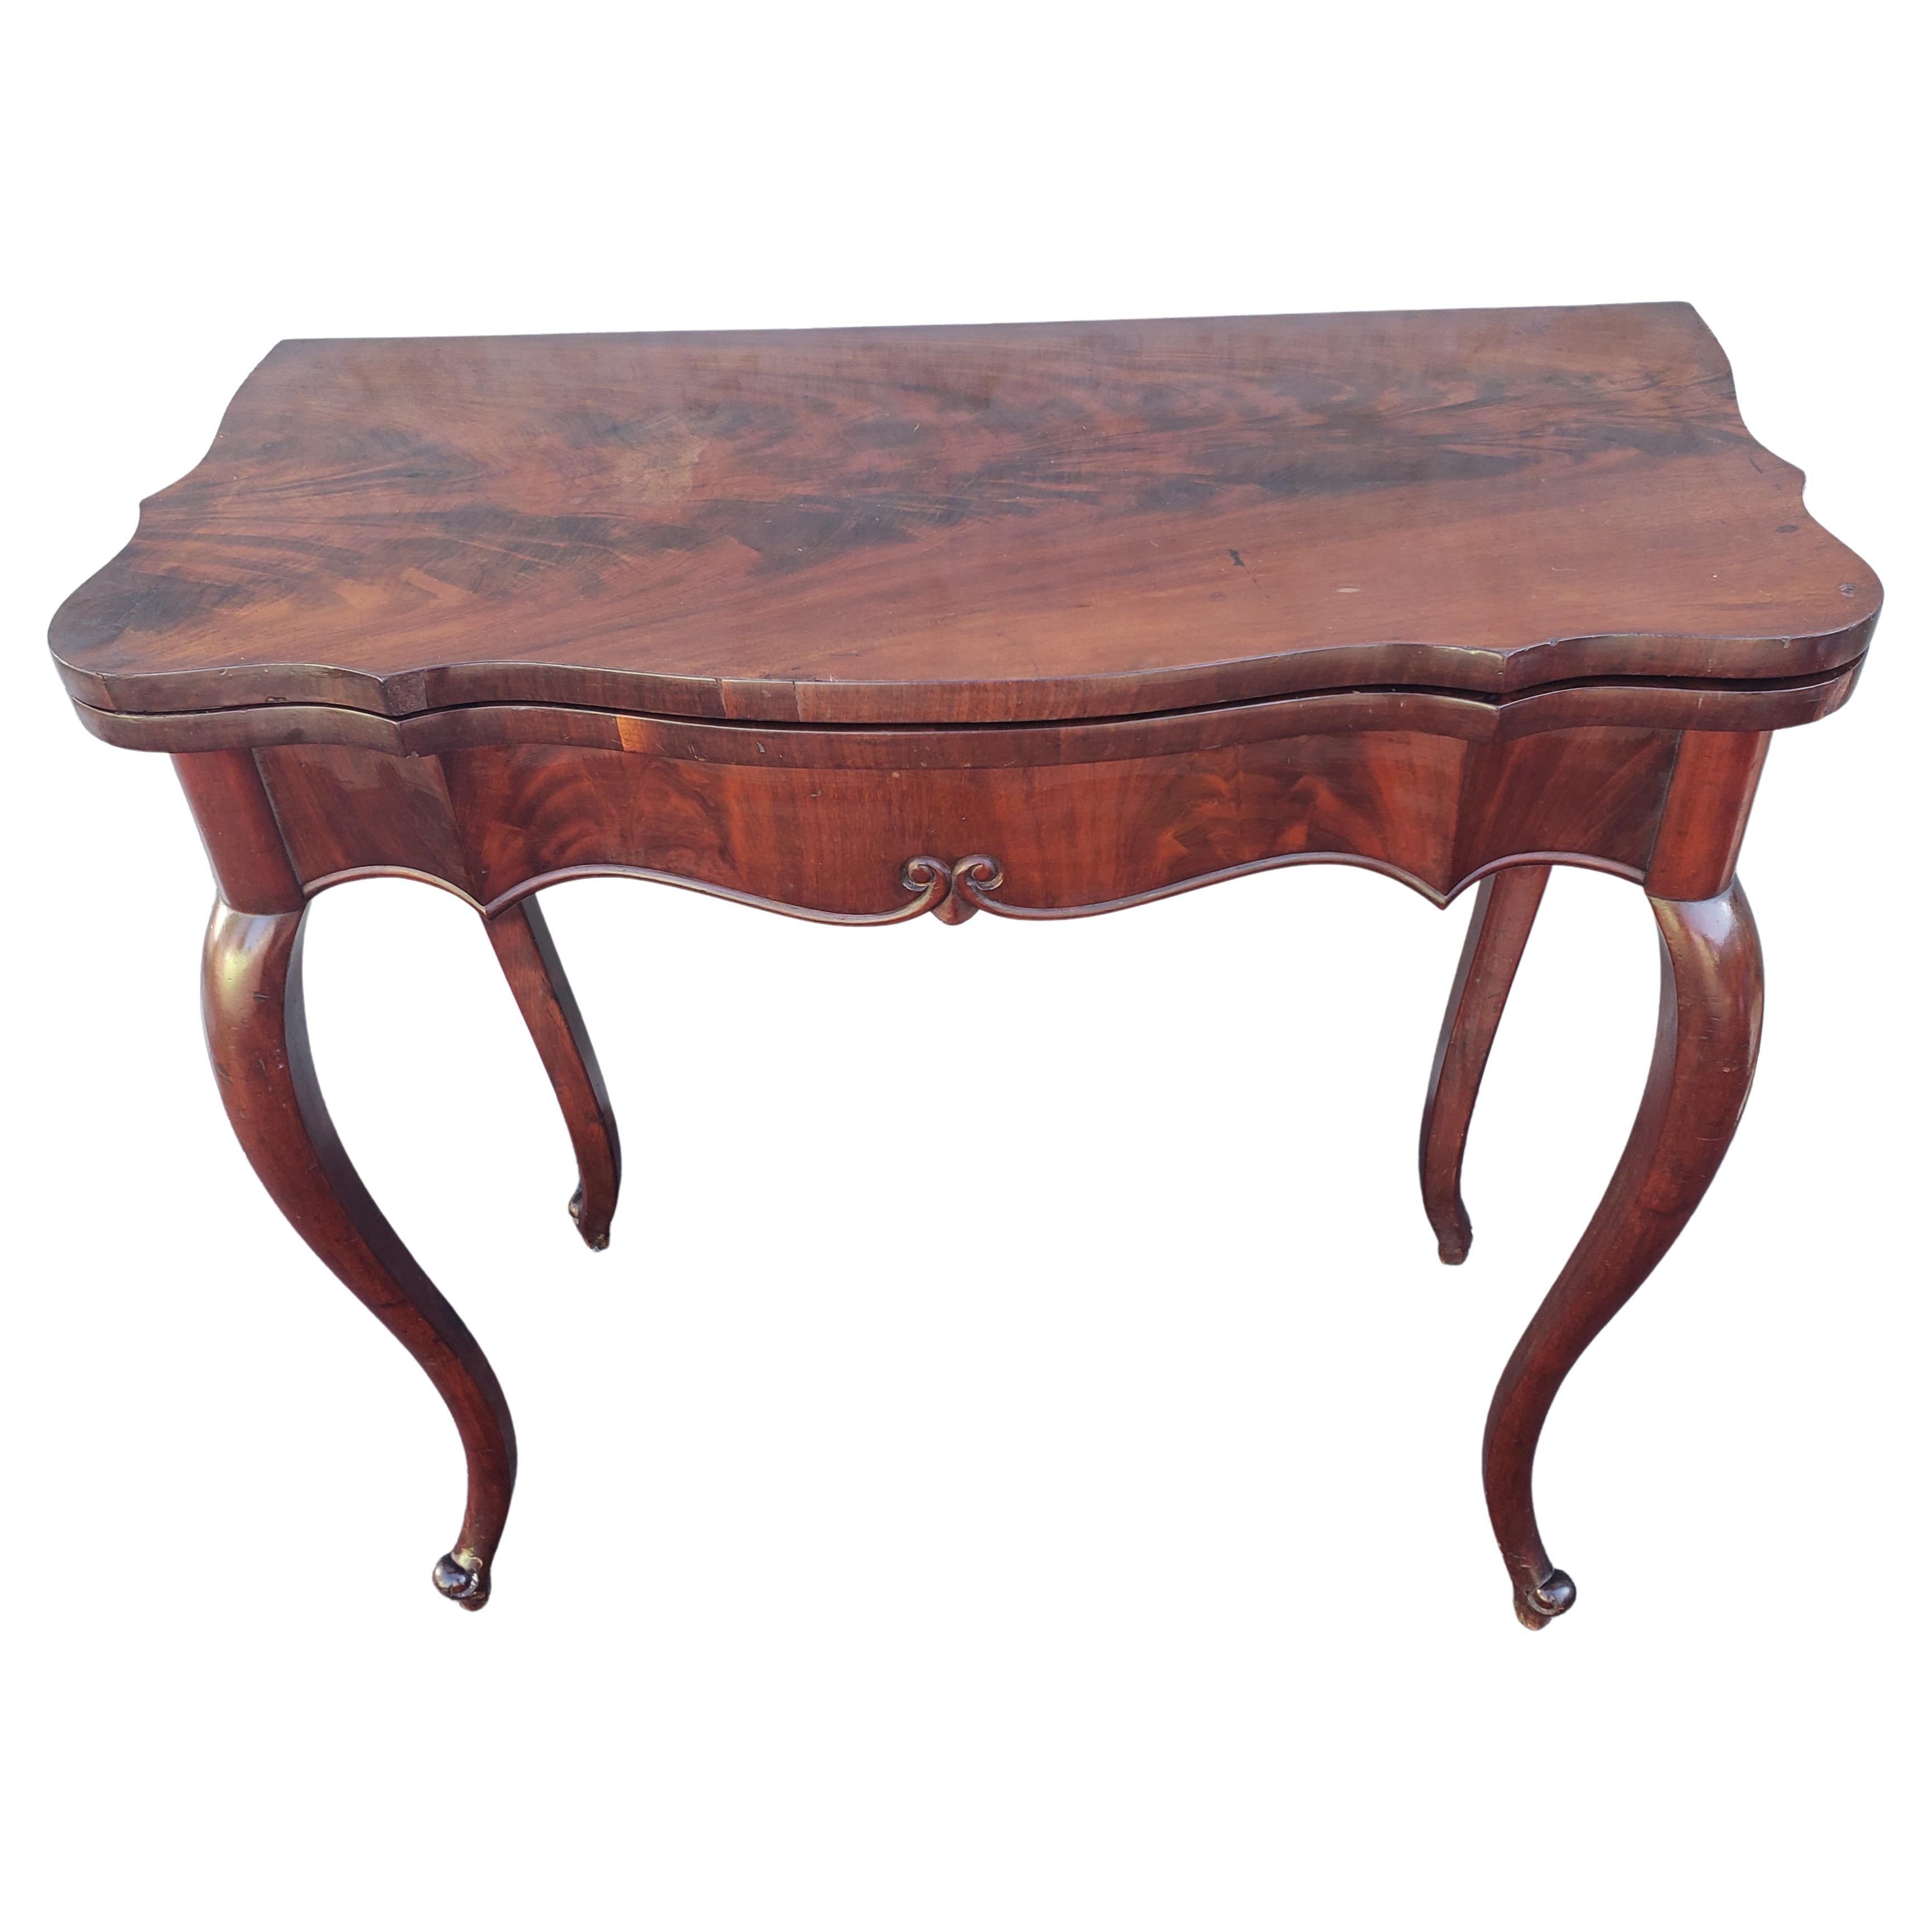 This beautifully proportioned table has a flip top in flame mahogany . Once opened, a playing surface of green baize, surrounded by well kept flame mahogany, is revealed. The gently scalloped apron flows attractively into gently curved cabriole